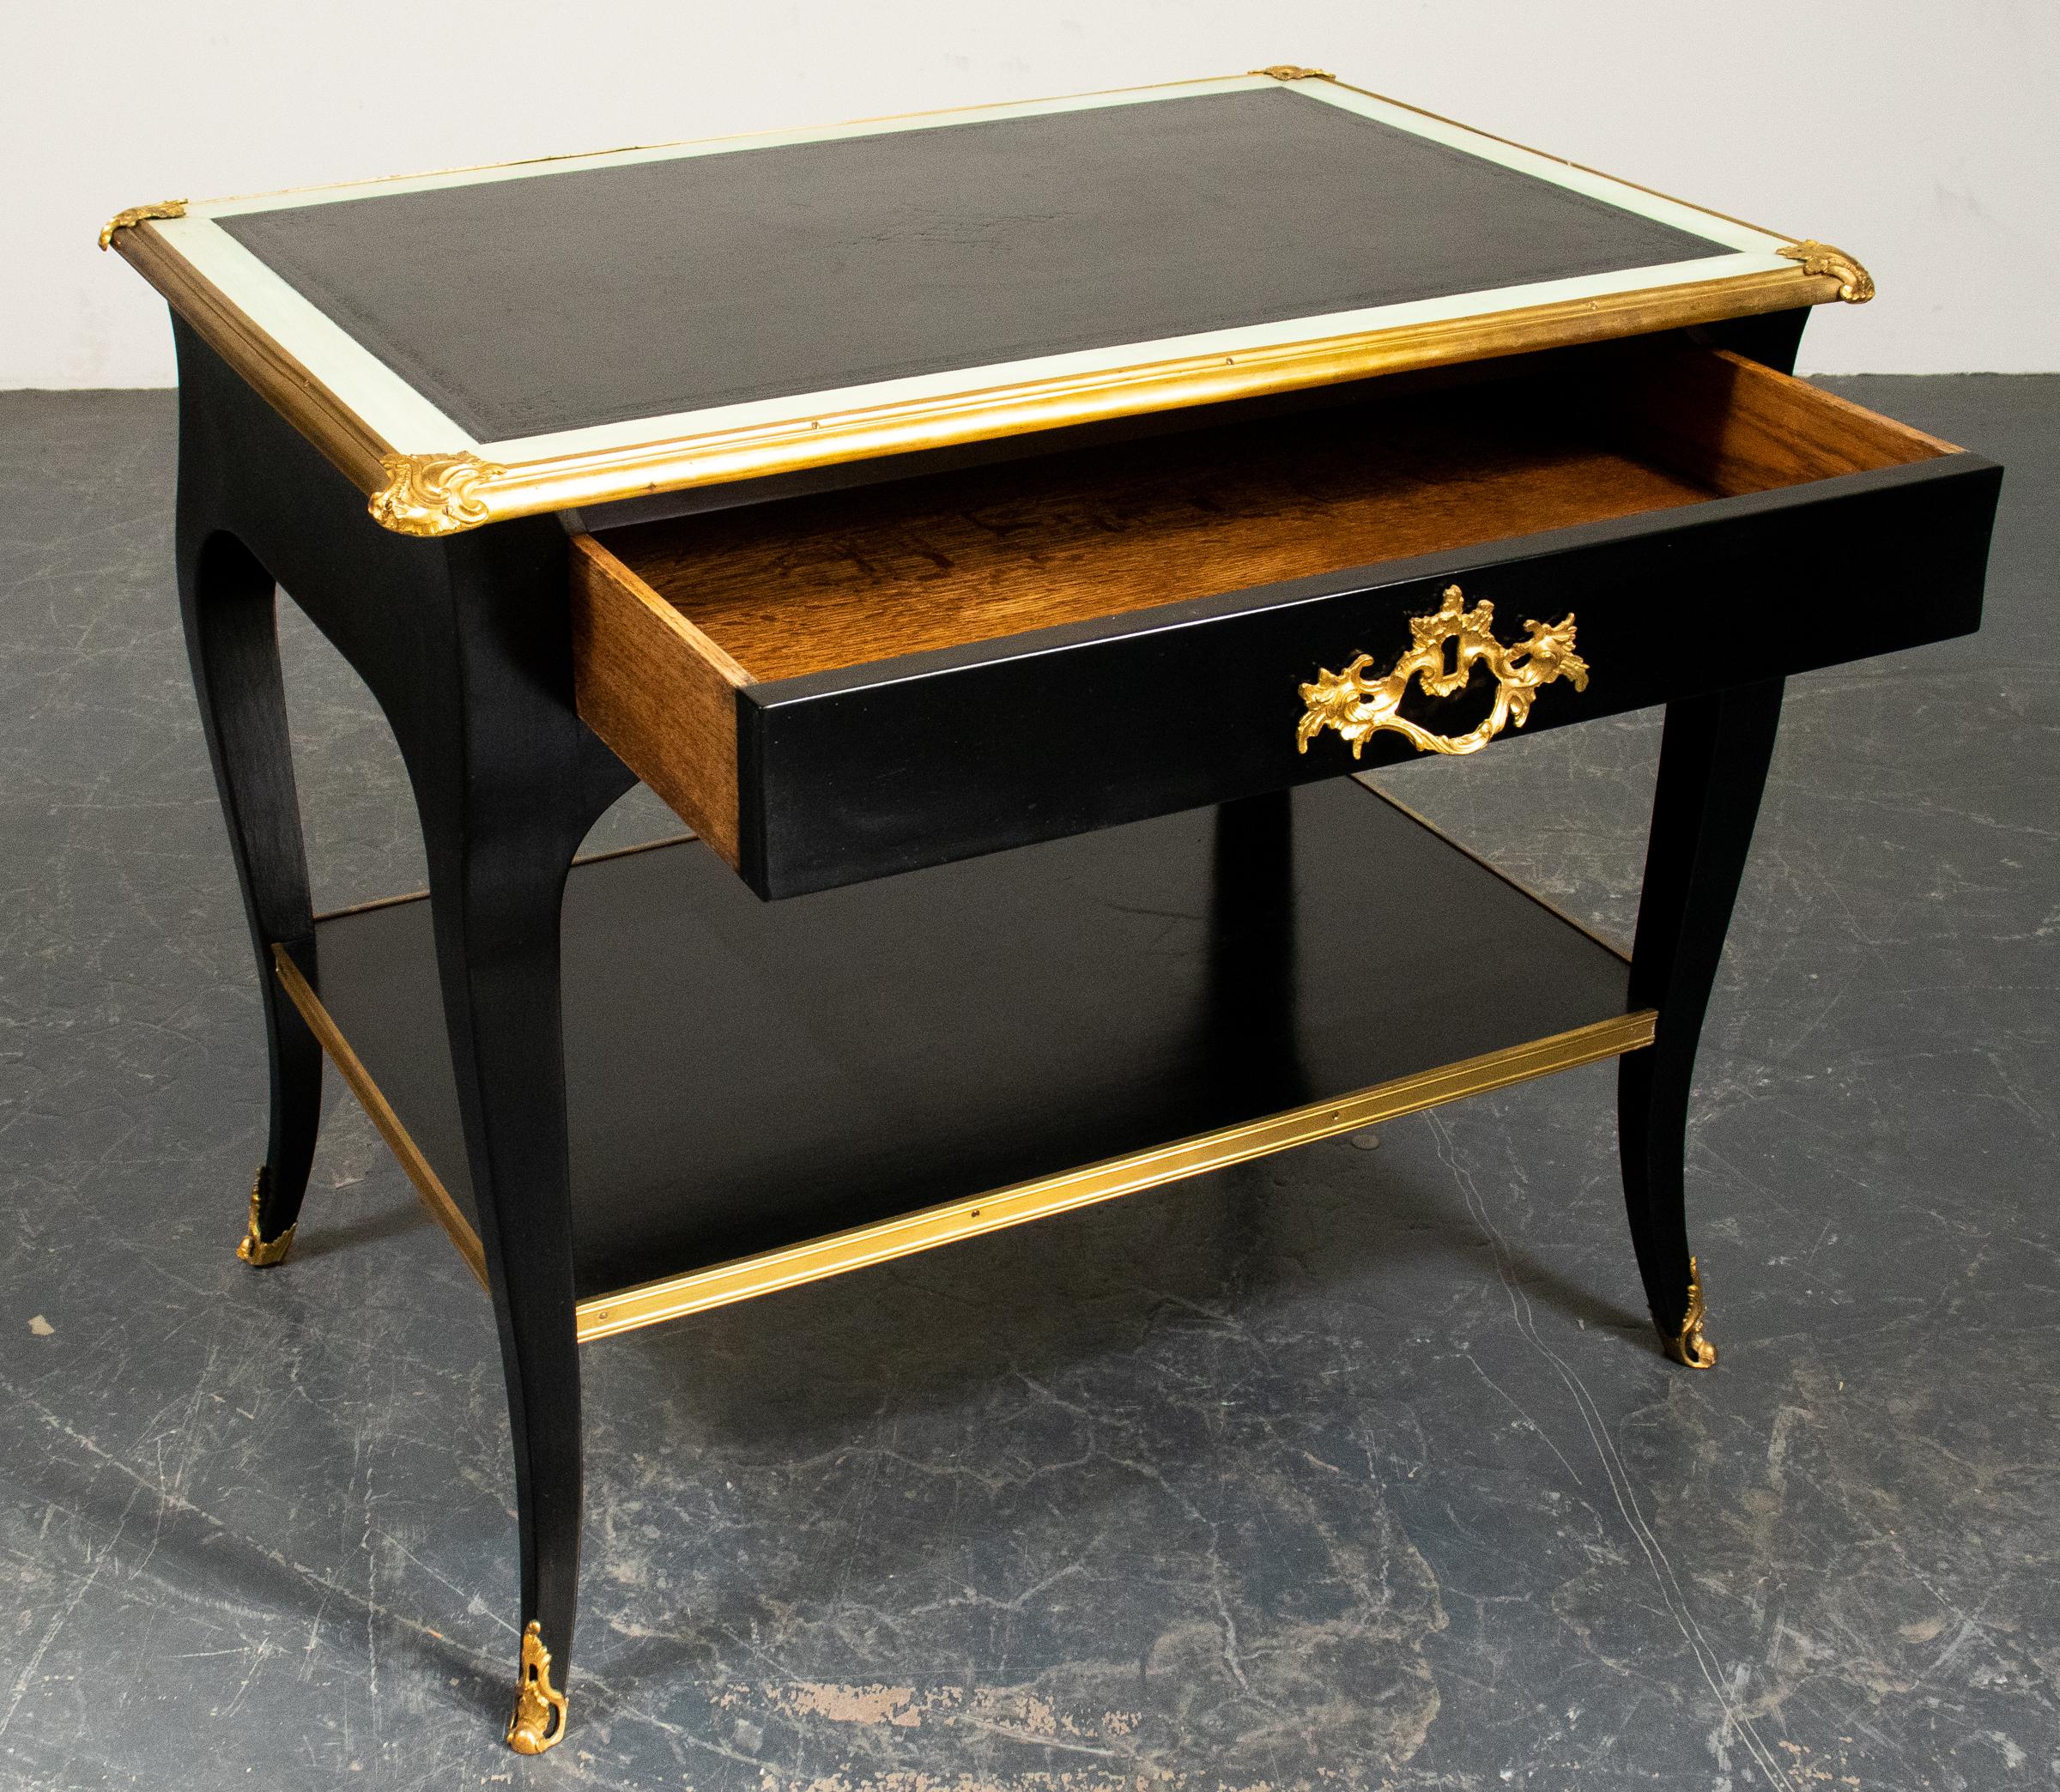 French Louis XV Style Gilt Mounted Ebonized Tea Table with Cabriole Legs 1